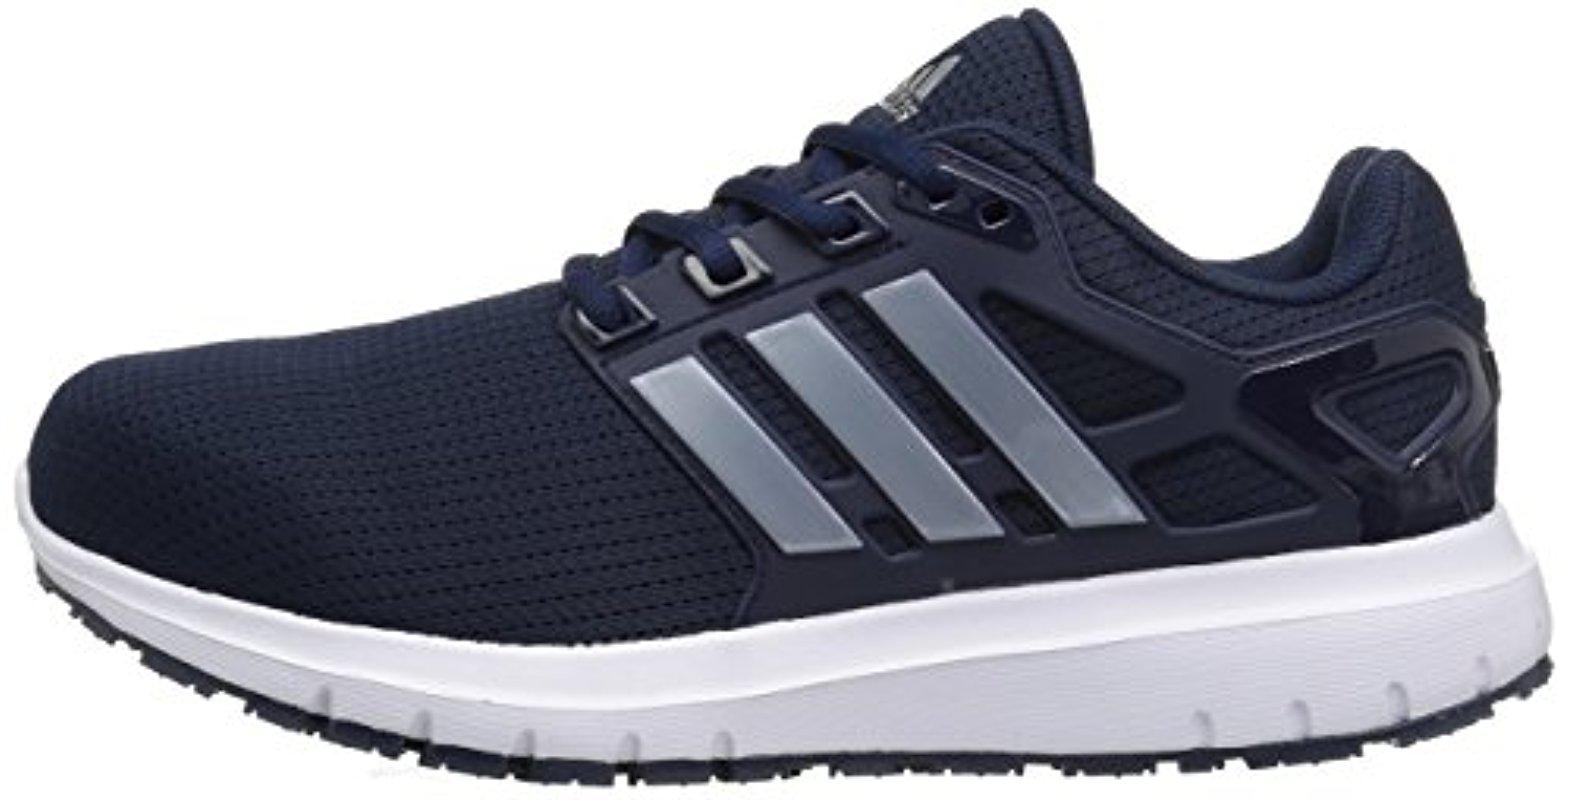 adidas Energy Cloud Wide M Running Shoe in Blue for Men - Lyst